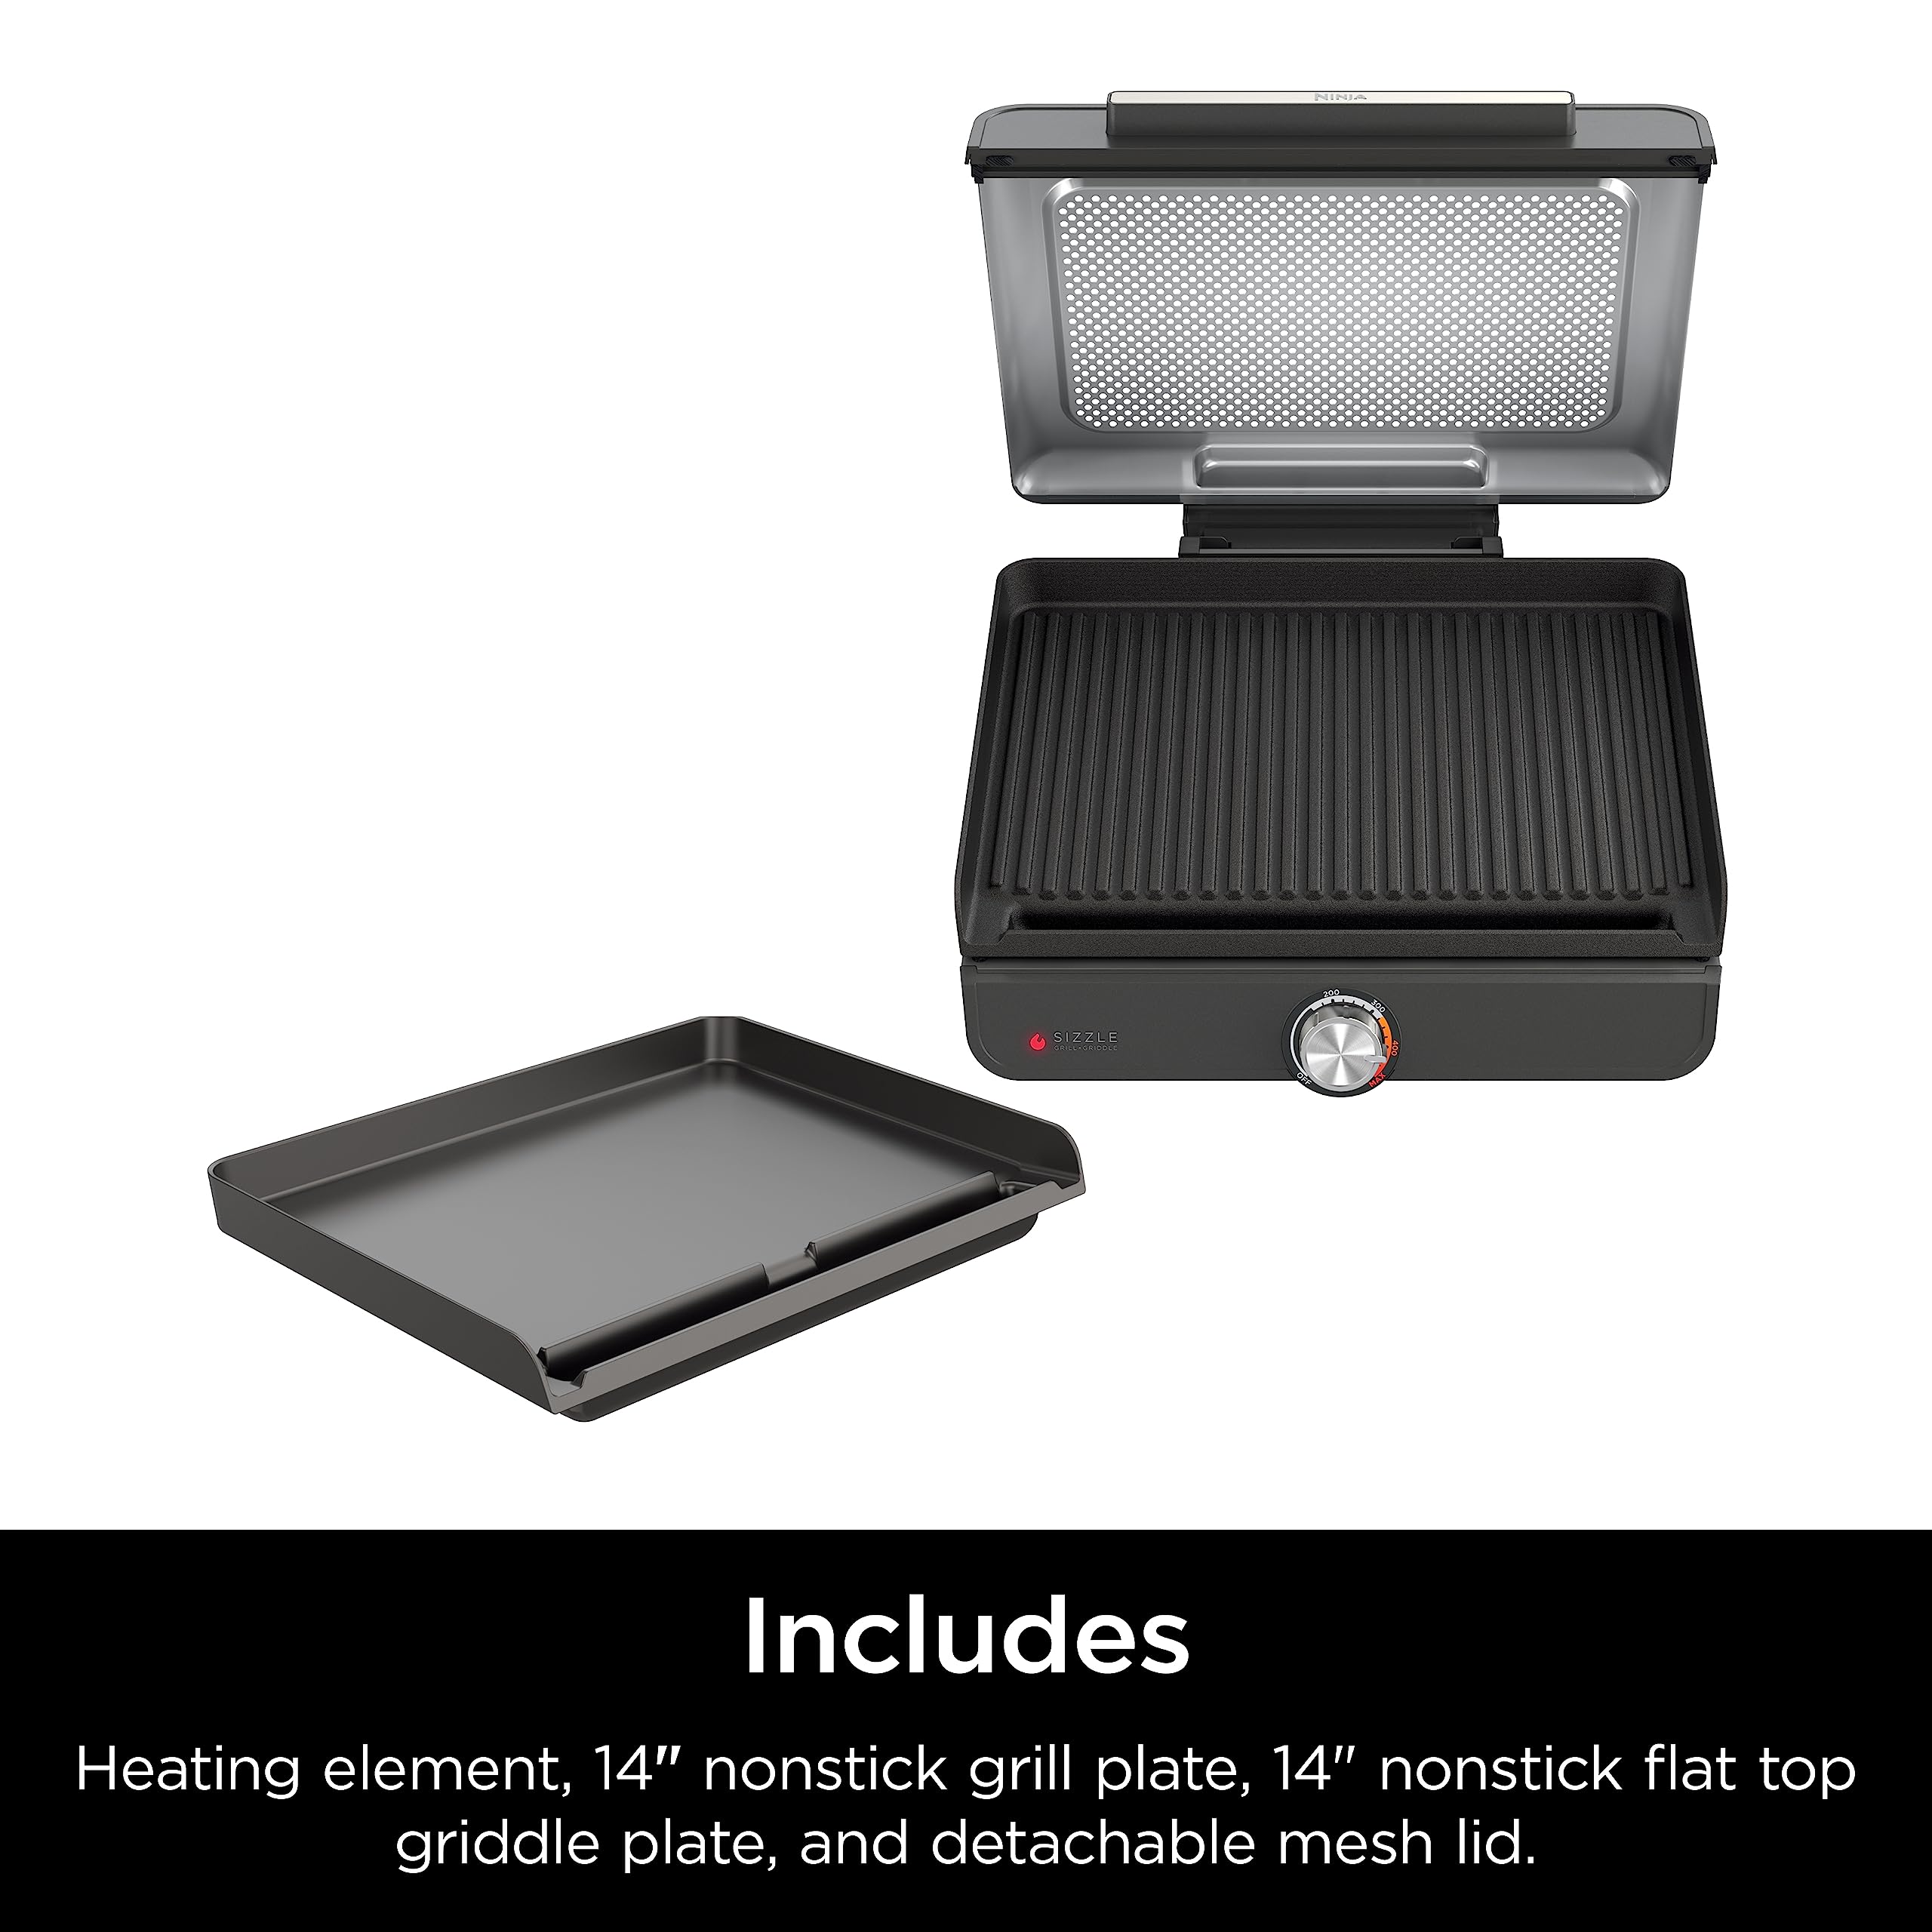 Ninja GR101 Sizzle Smokeless Indoor Grill & Griddle, 14'' Interchangeable Nonstick Grill and Griddle Plates, Dishwasher-Safe Removable Mesh Lid, 500F Max Heat, Even Edge-to-Edge Cooking, Grey/Silver